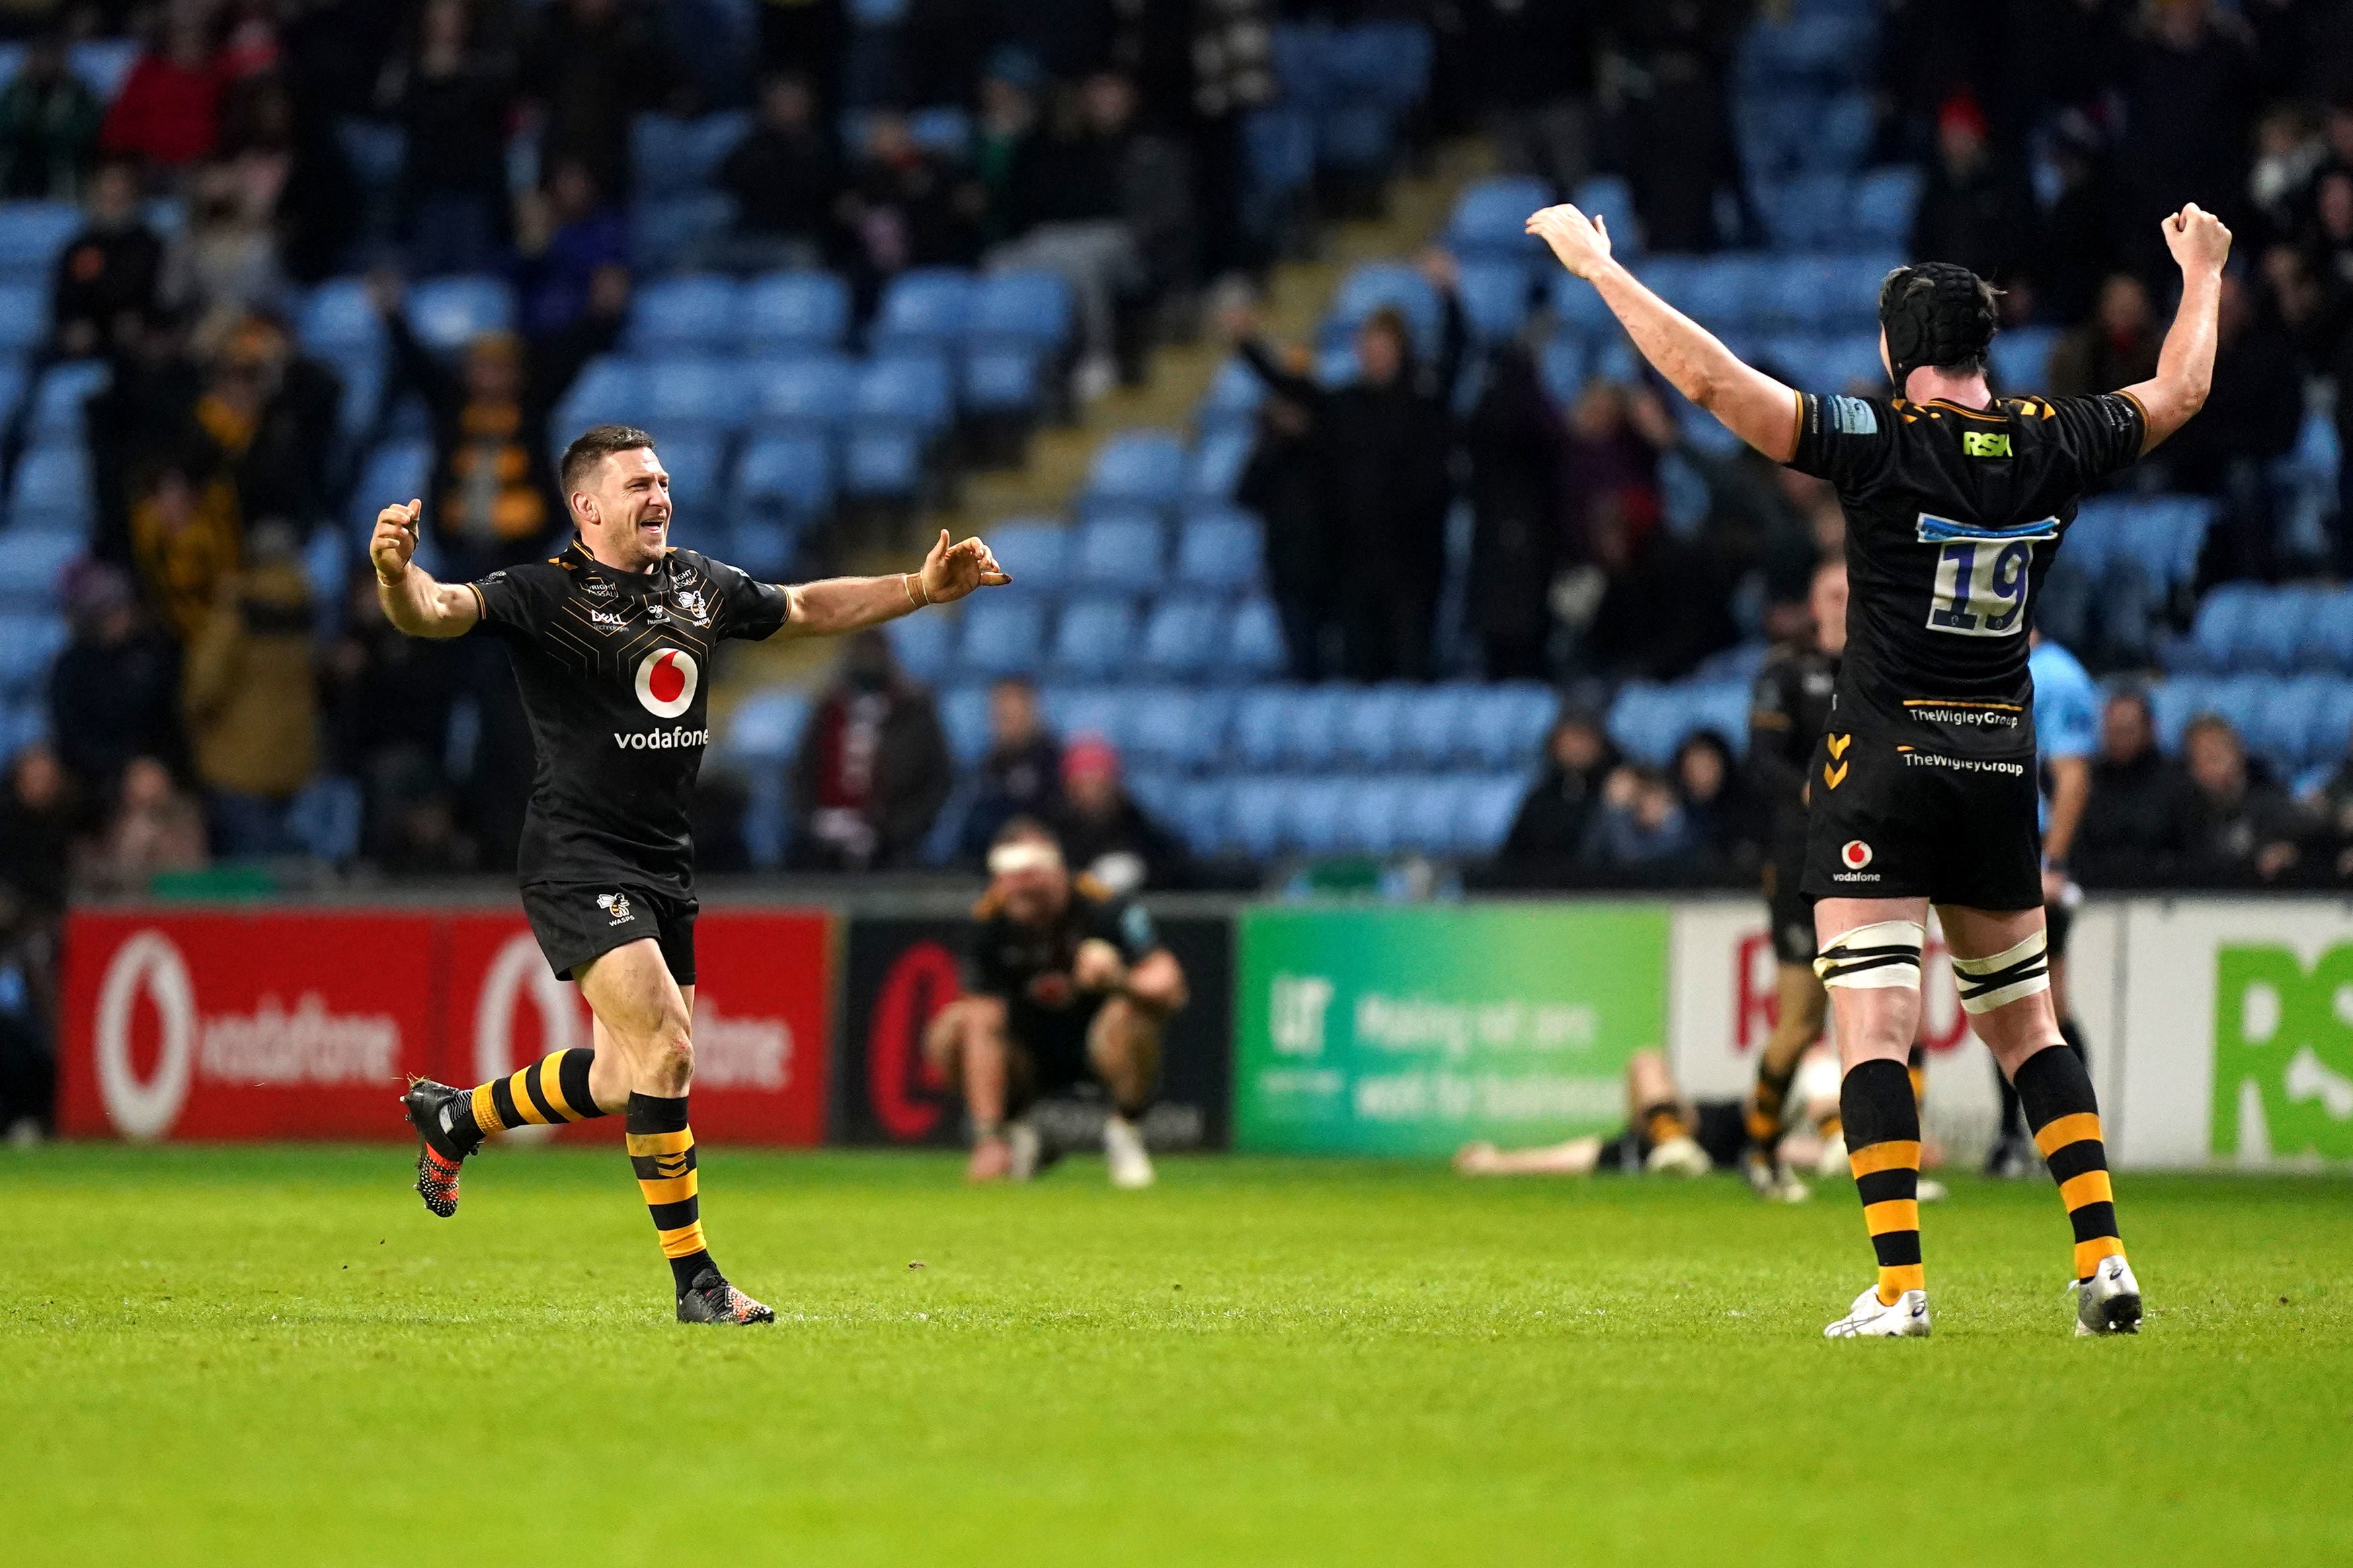 Wasps’ Jimmy Gopperth and Tim Cardall celebrate at full-time